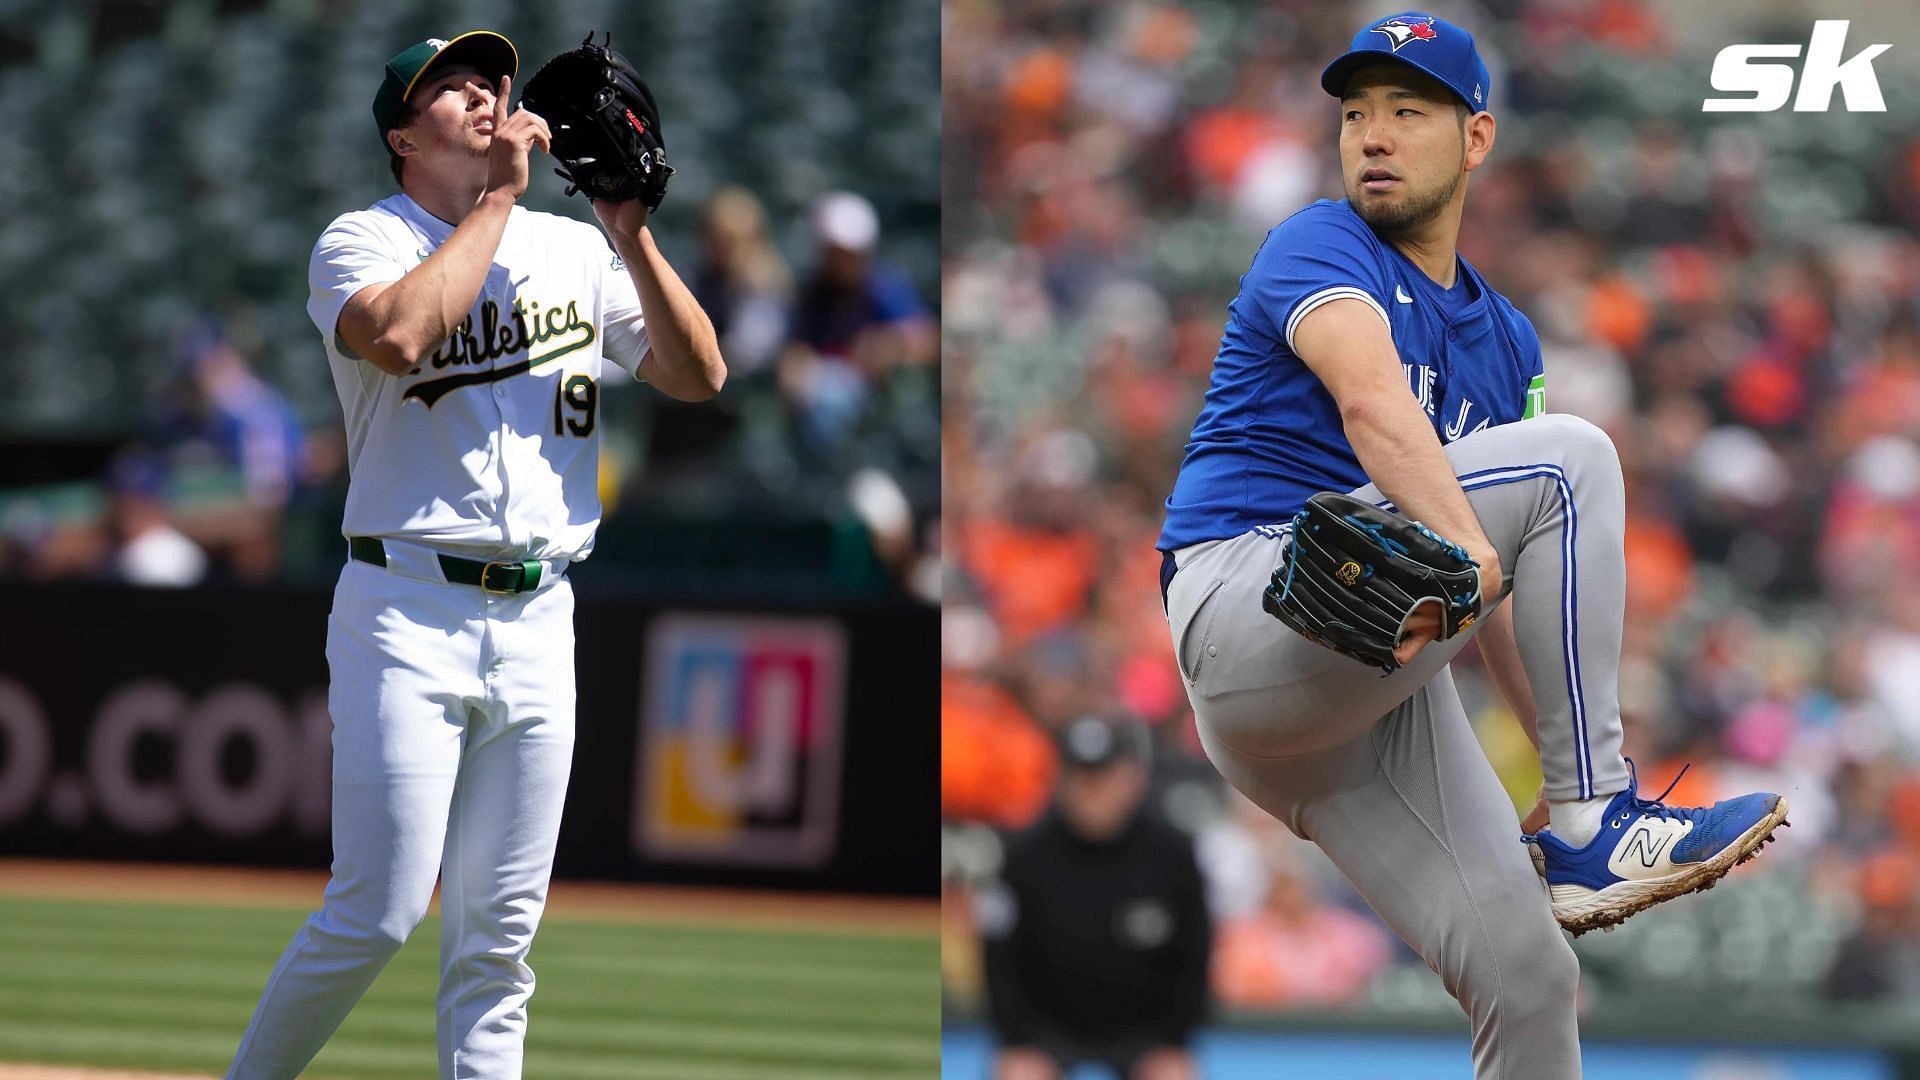 Mason Miller and Yusei Kikuchi are two potential trade targets for the Cubs this season